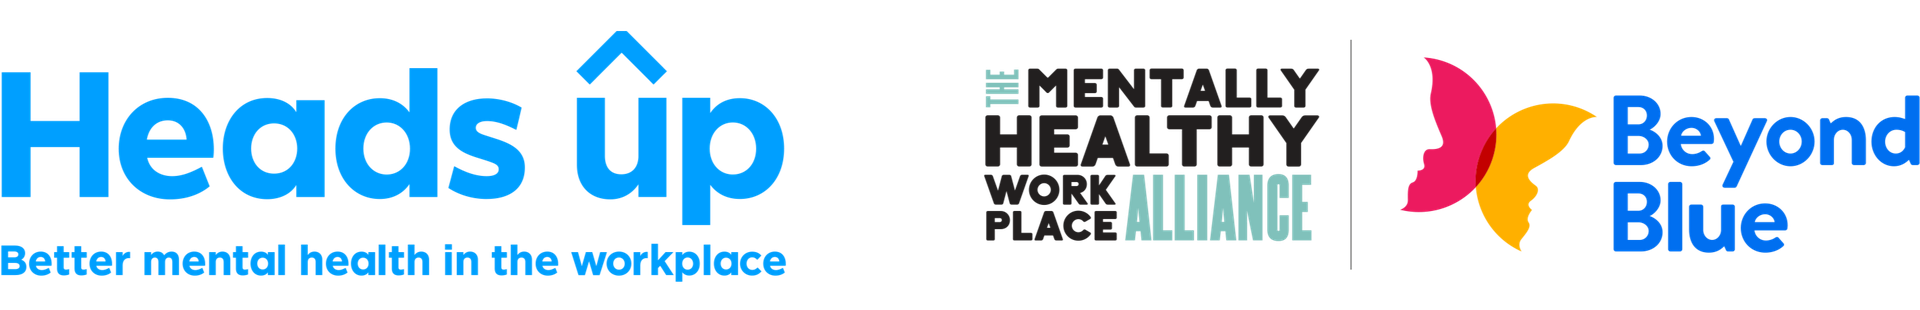 Heads up: Better mental health in the workplace